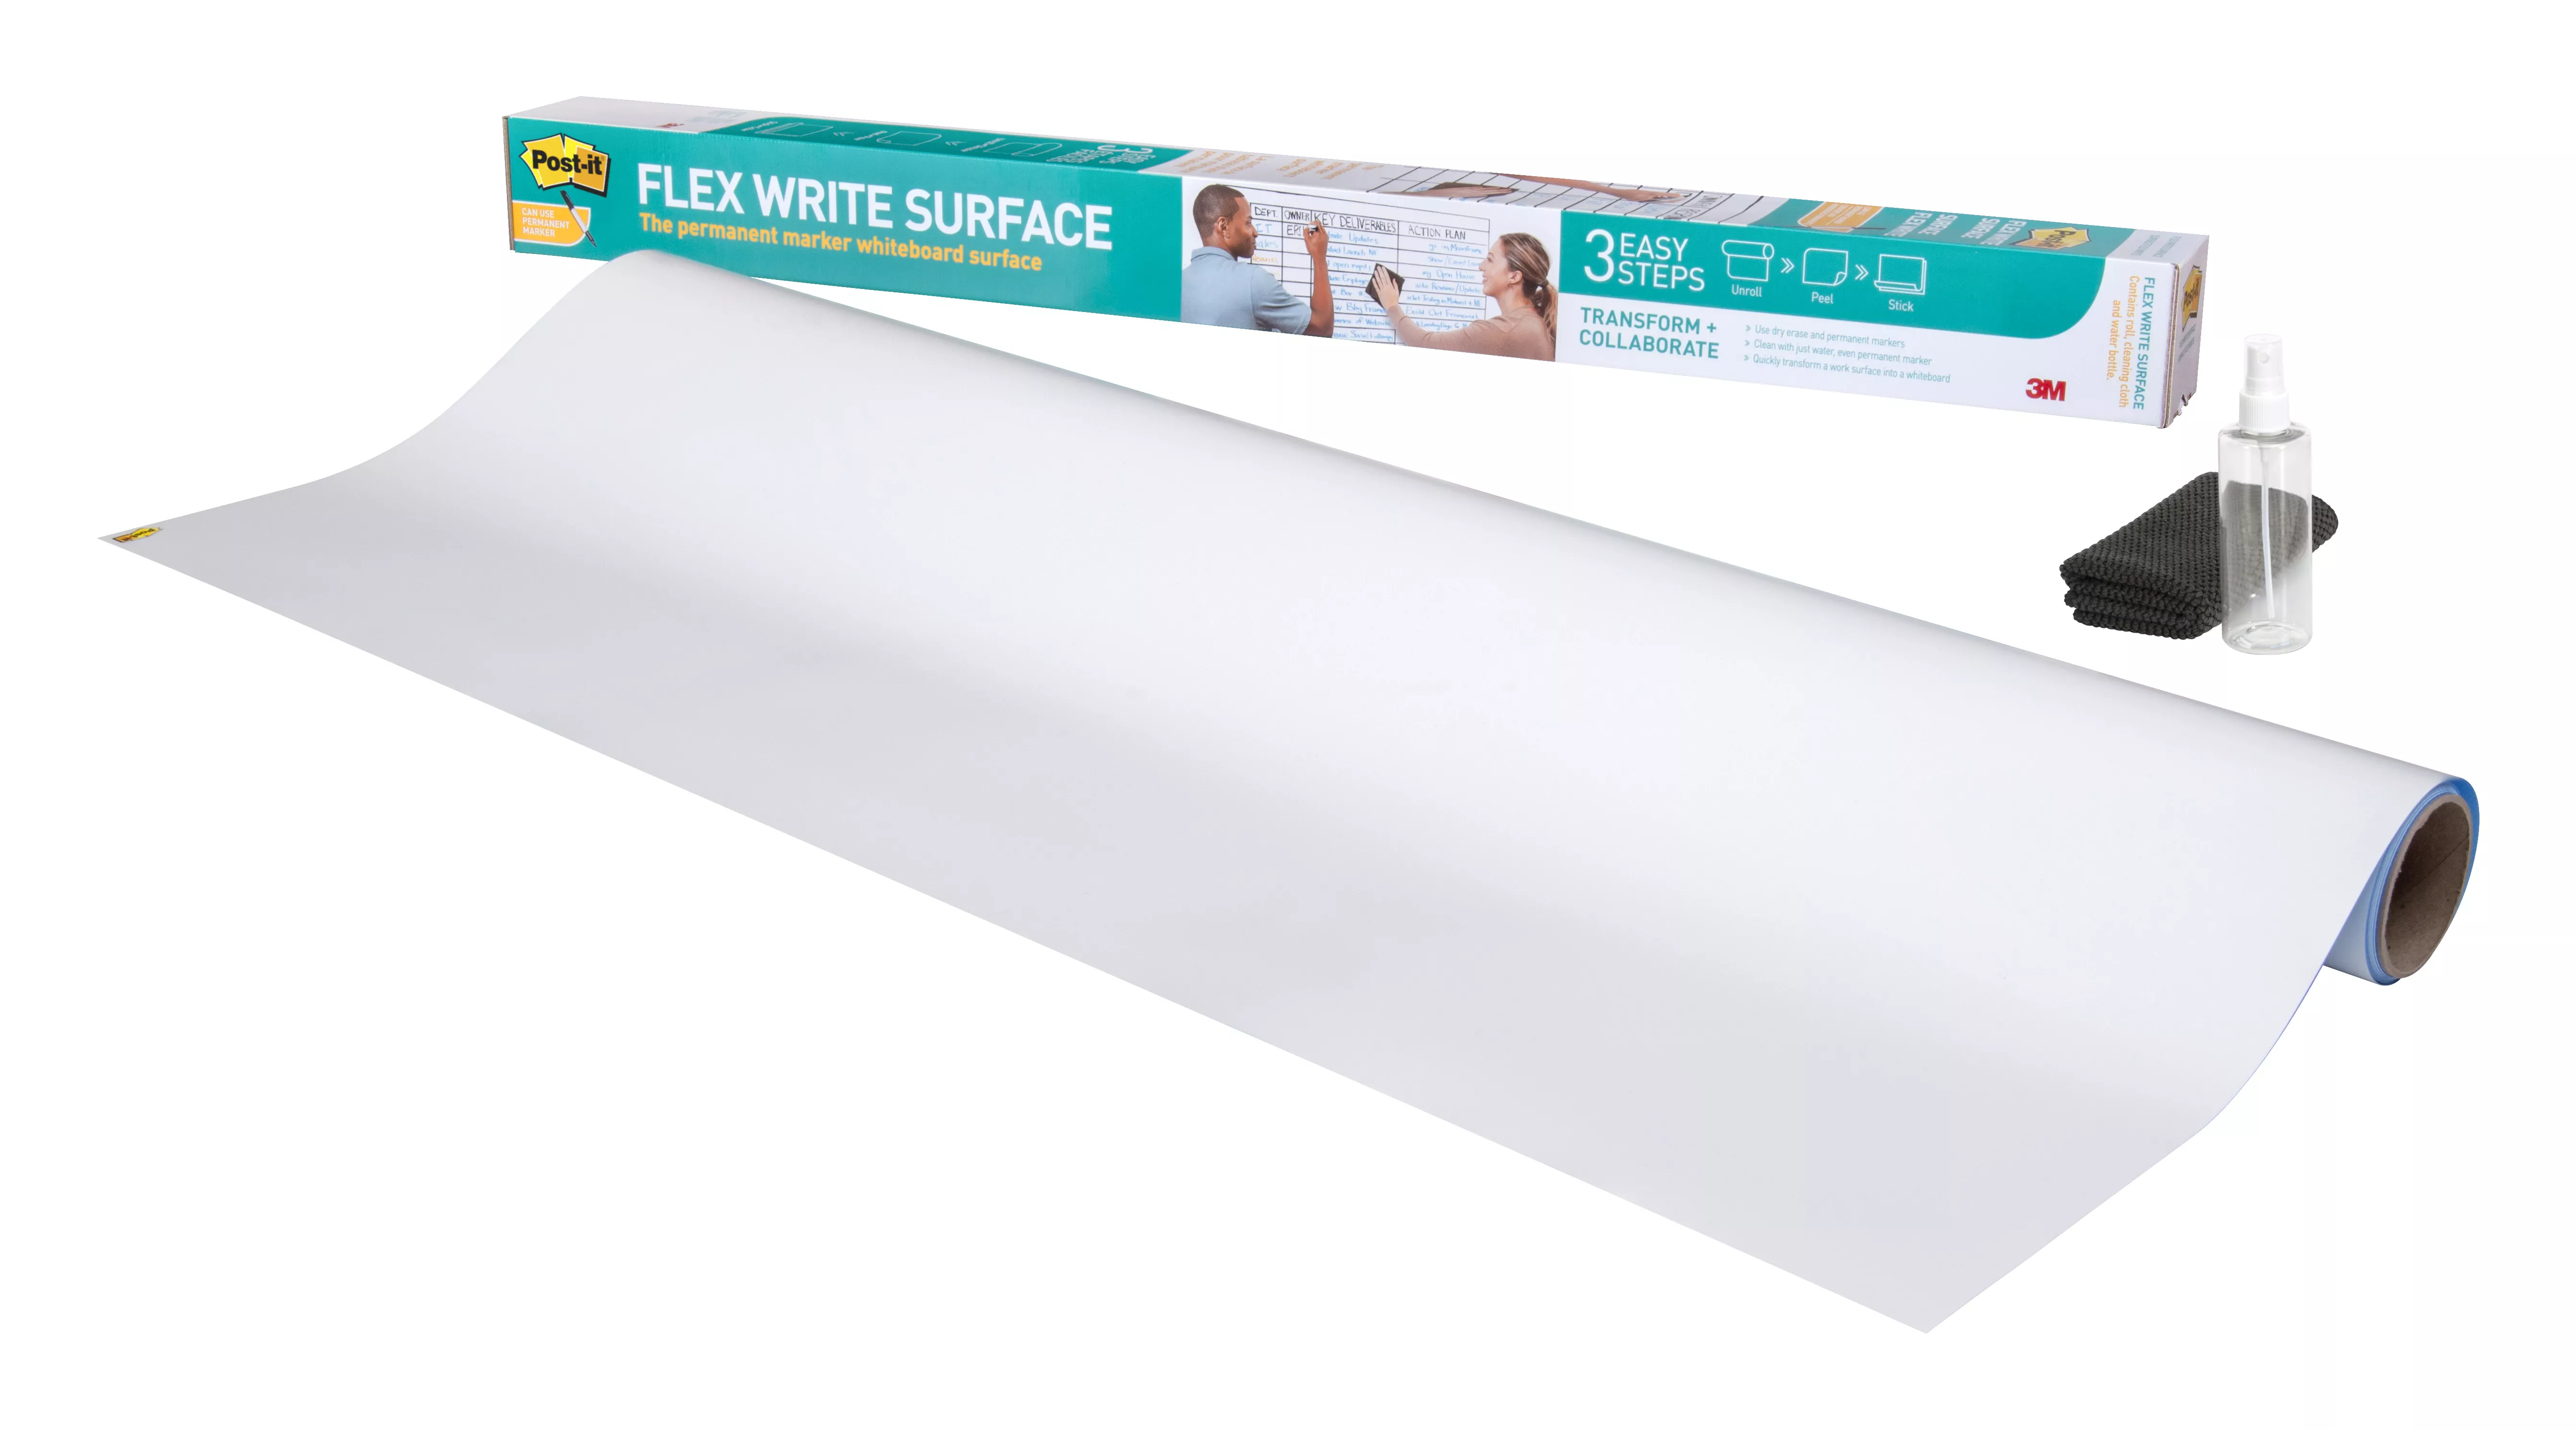 Post-it® Flex Write Surface, The Permanent Marker Whiteboard Surface, 4
ft. x 3 ft.